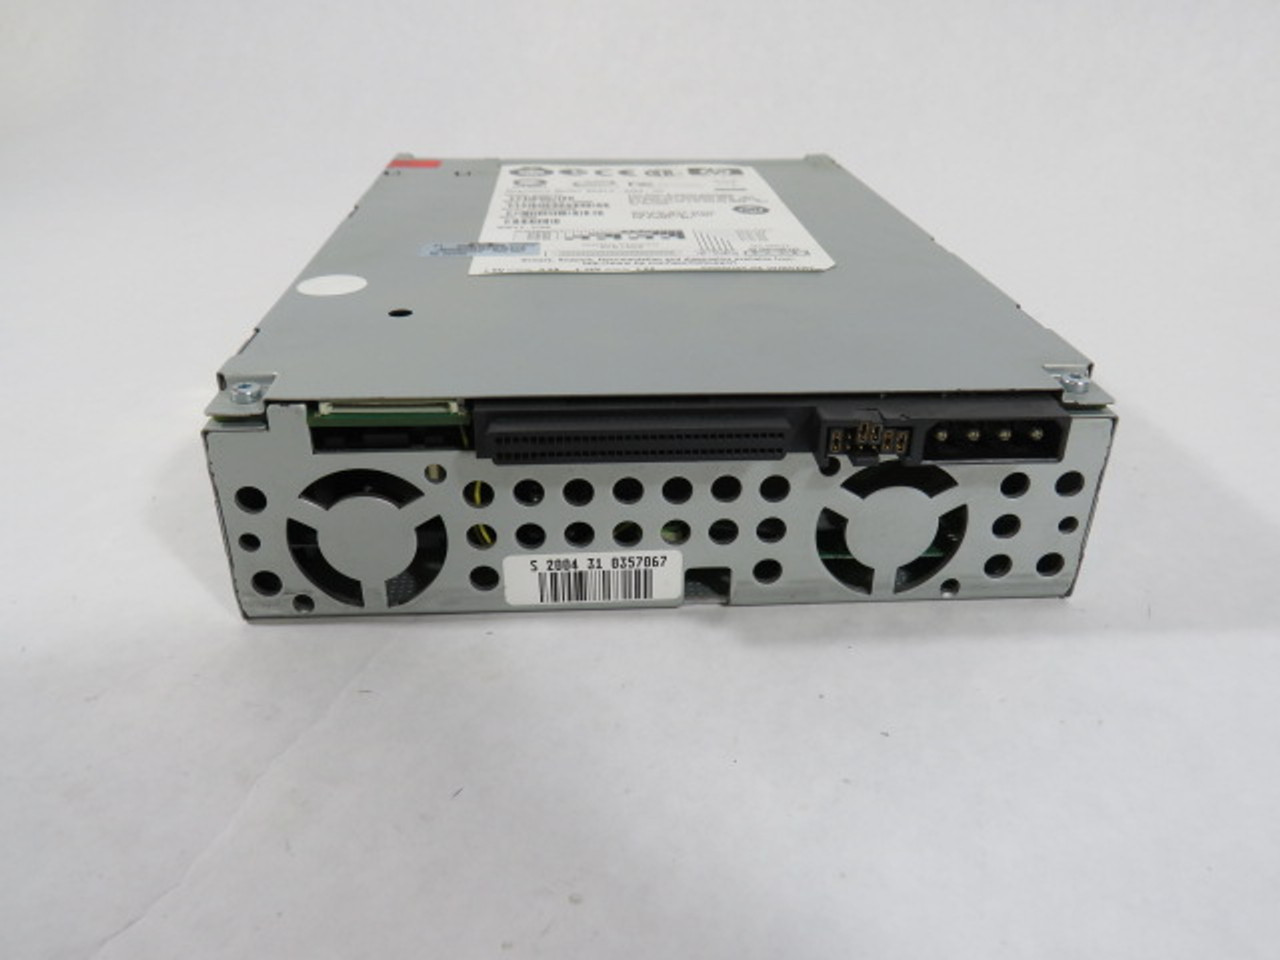 HP BRSLA-0404-DC Ultrium 448 Tape Drive MISSING FRONT COVER USED